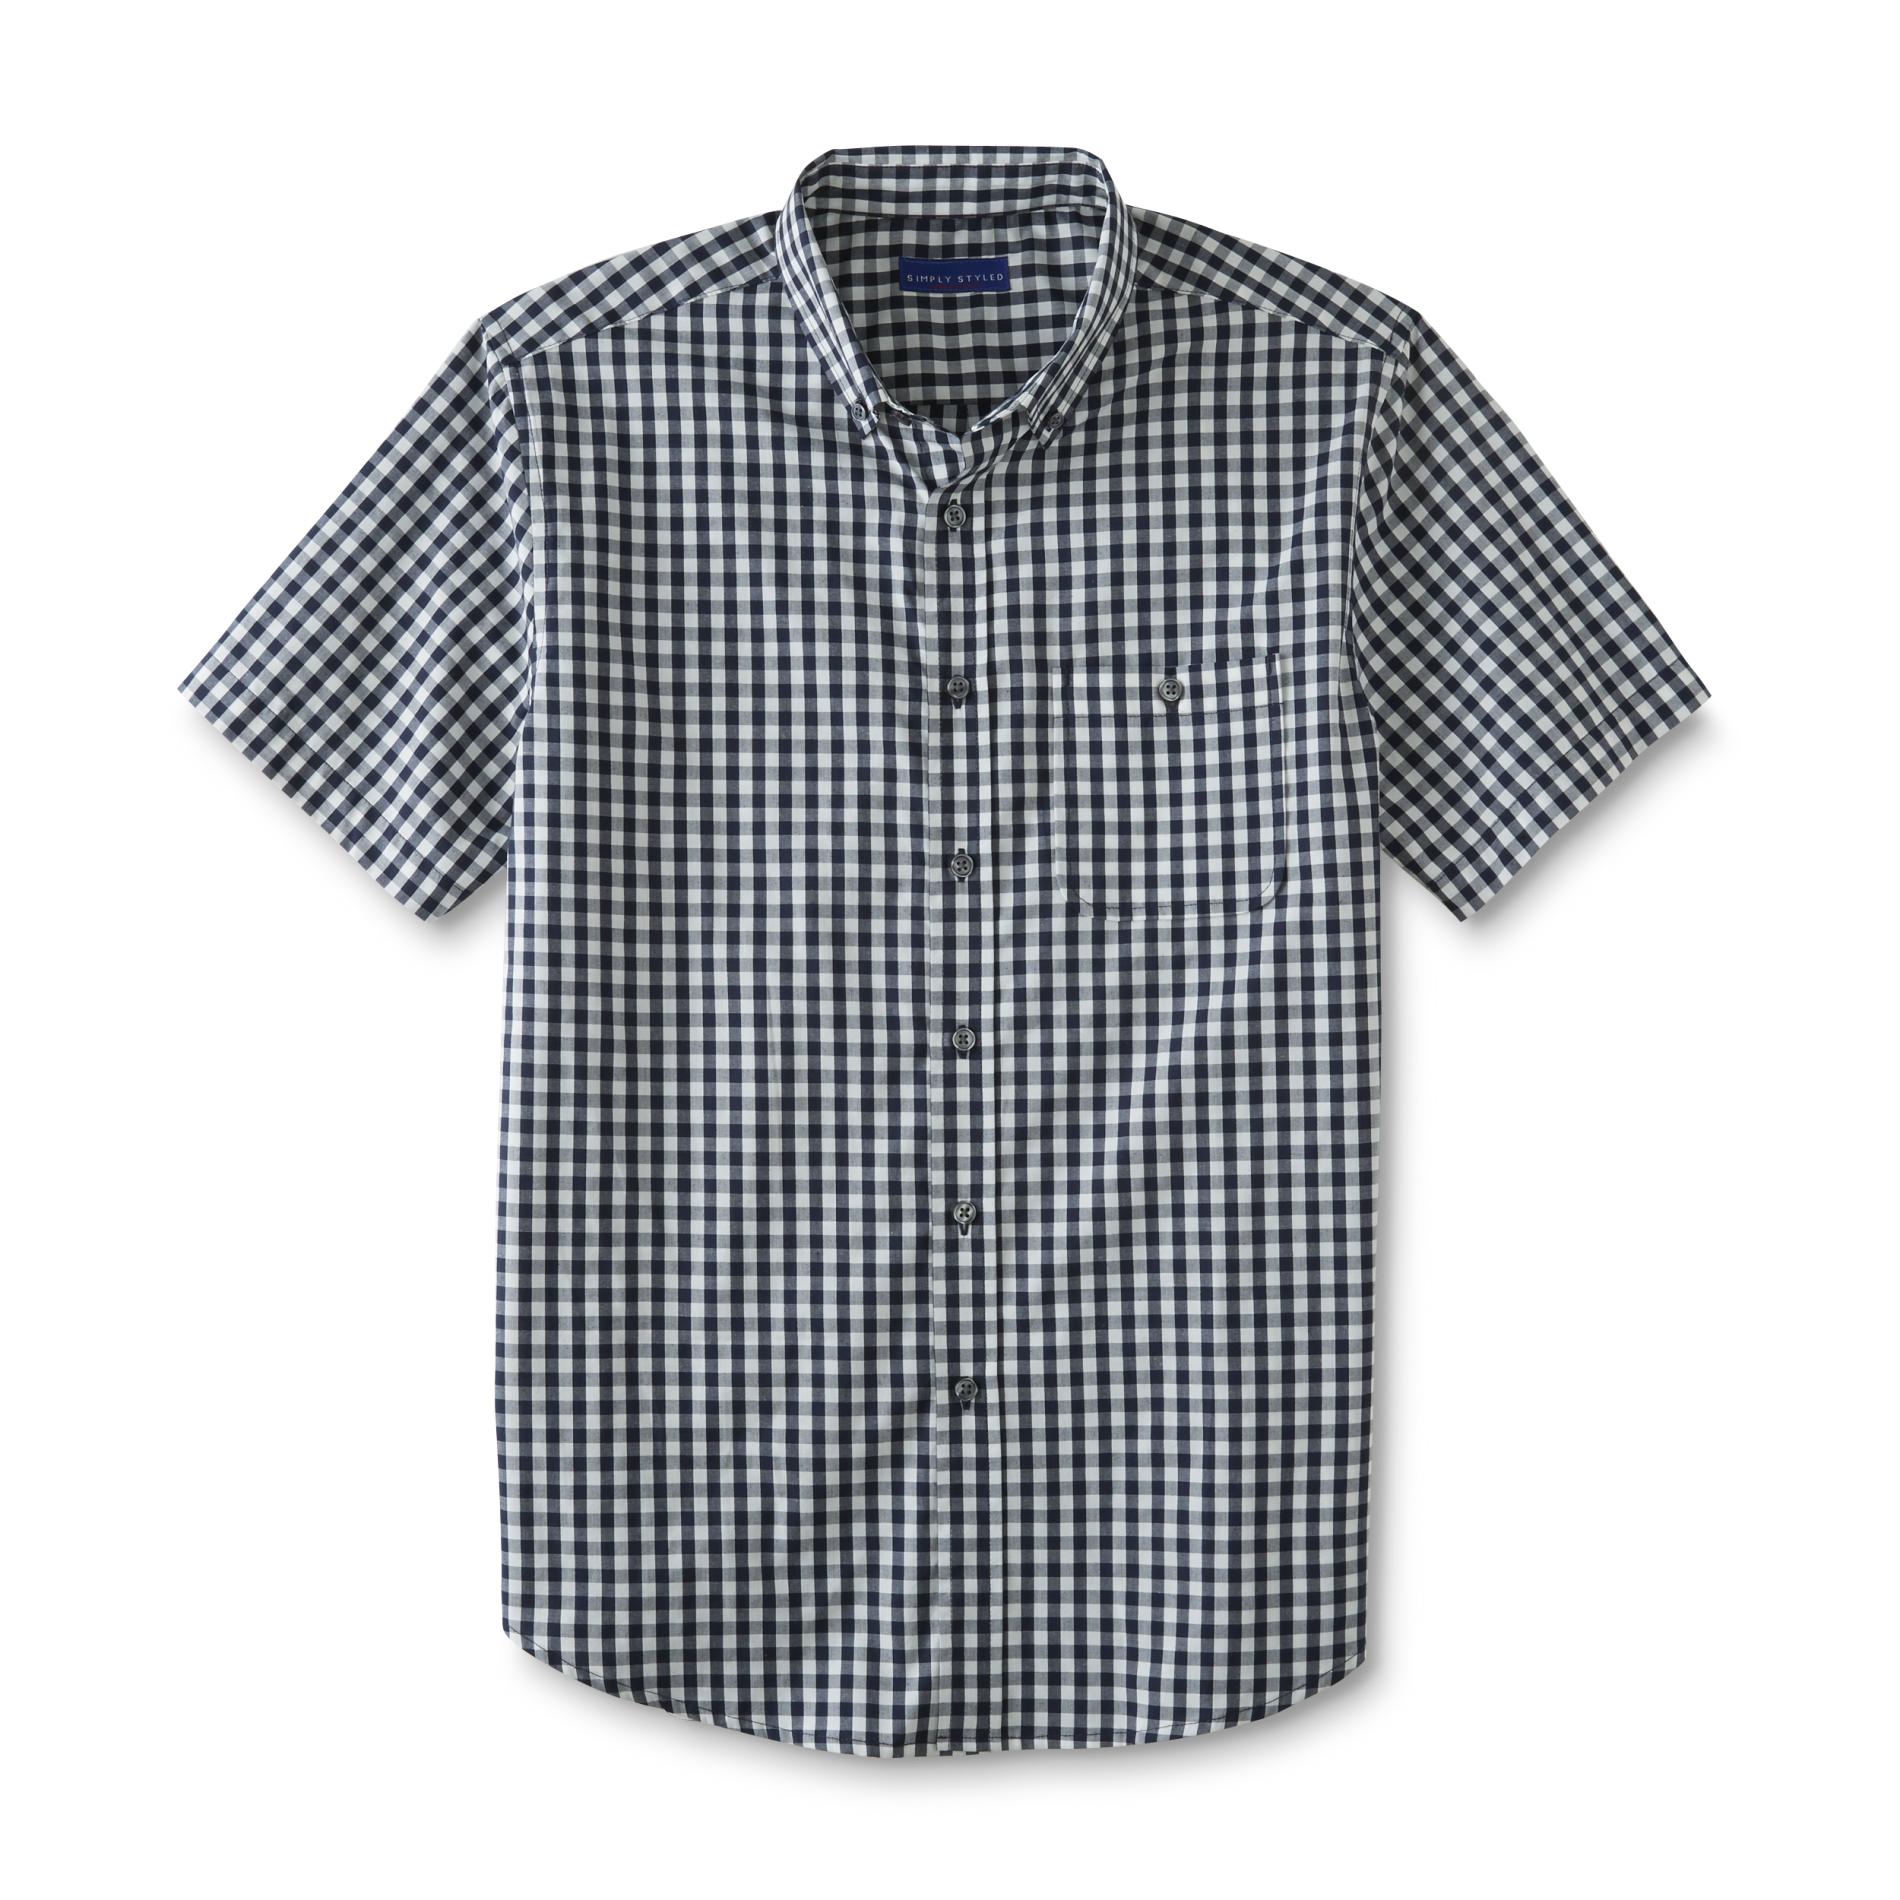 Simply Styled Men's Button-Front Shirt - Plaid